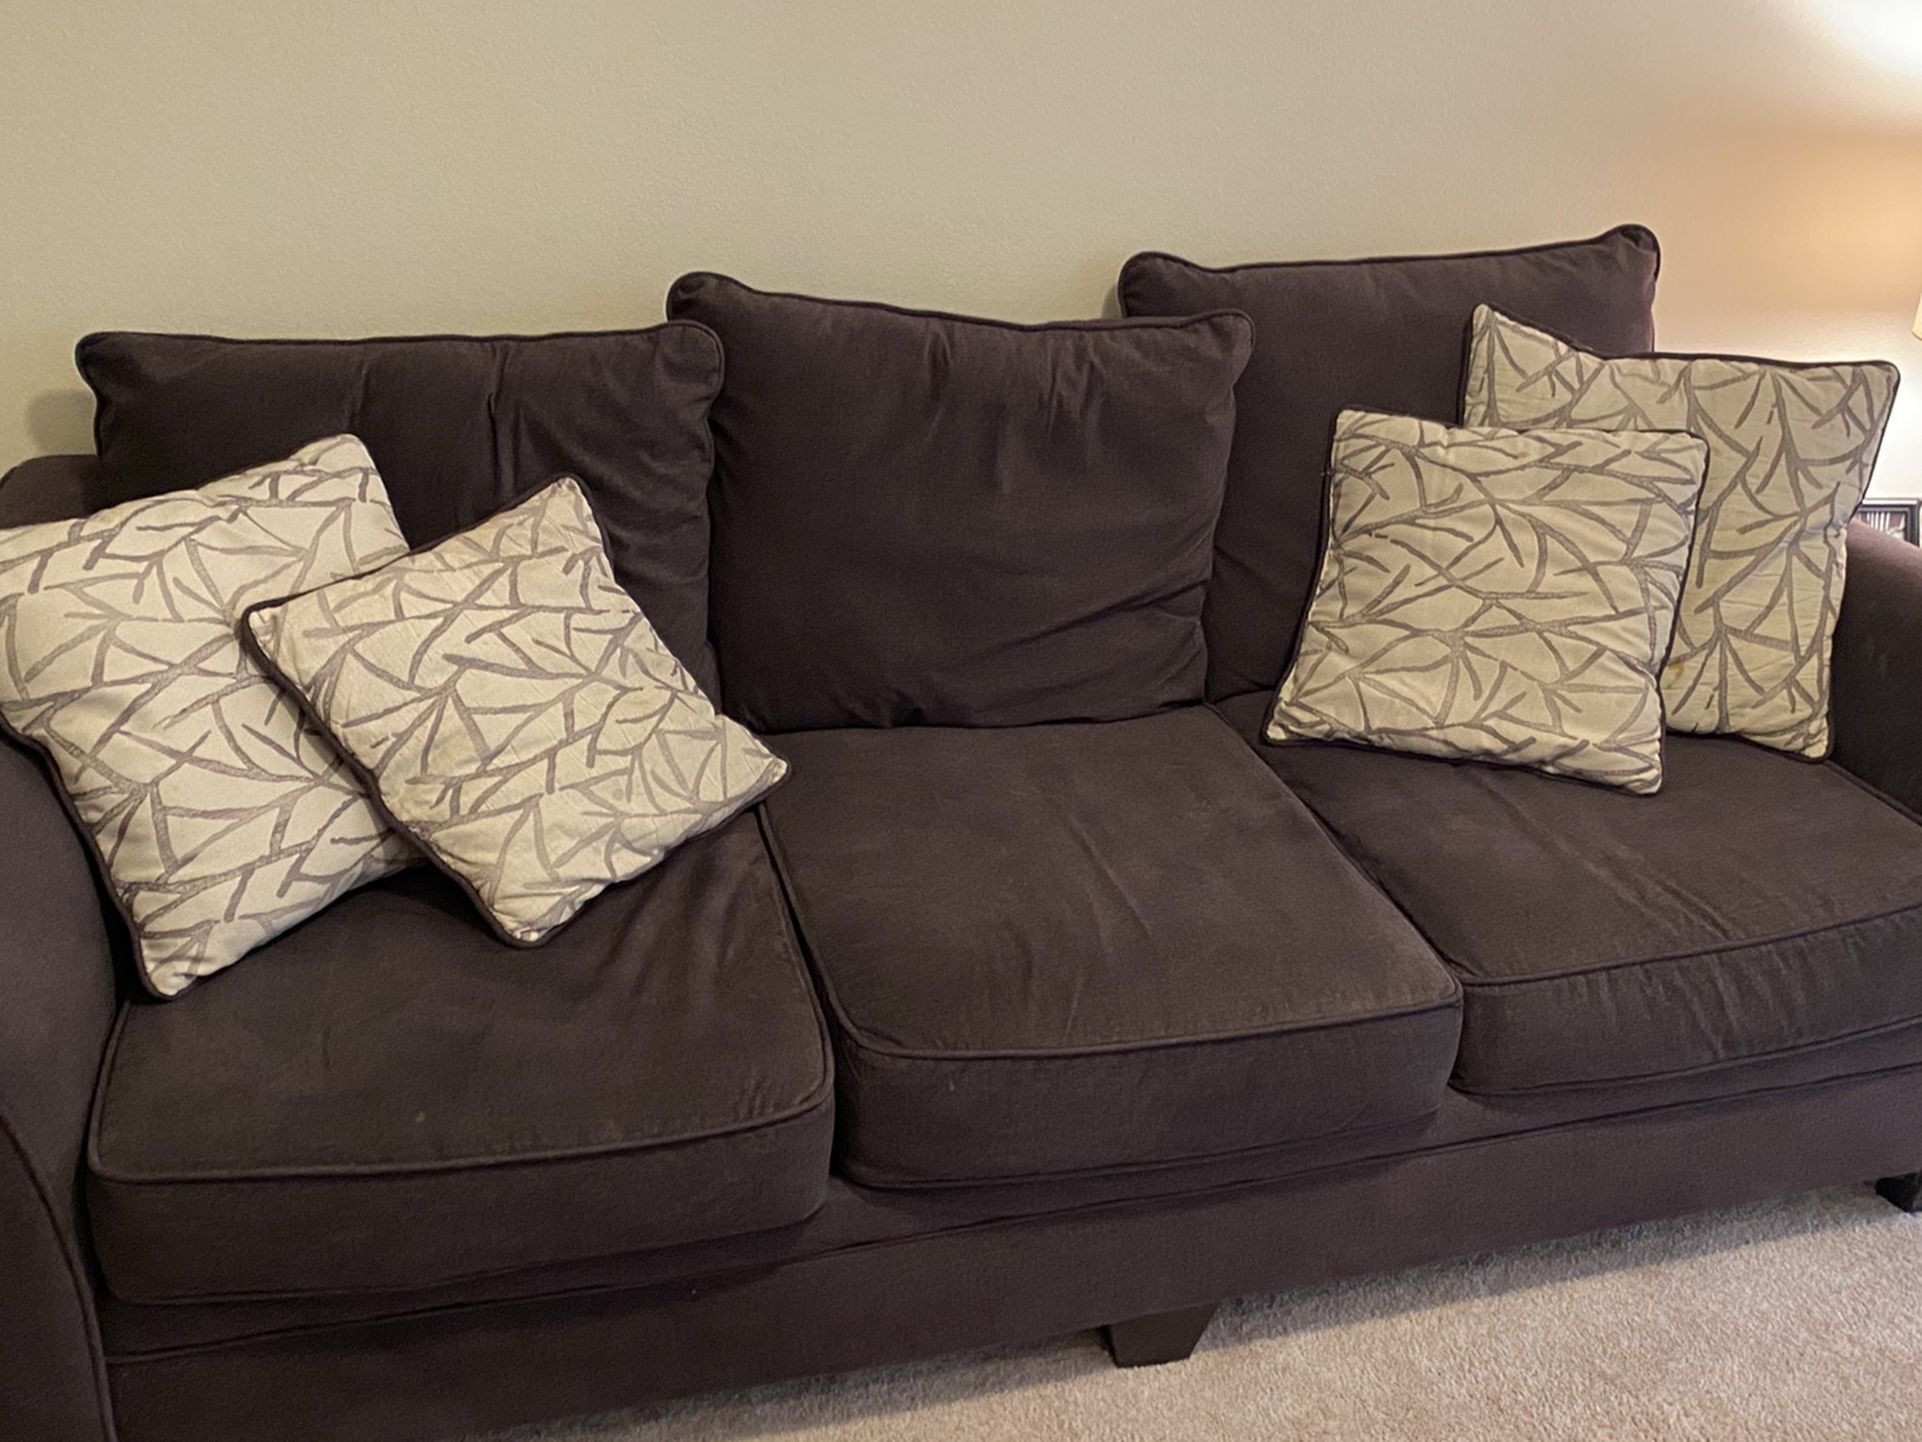 Couch With pillows